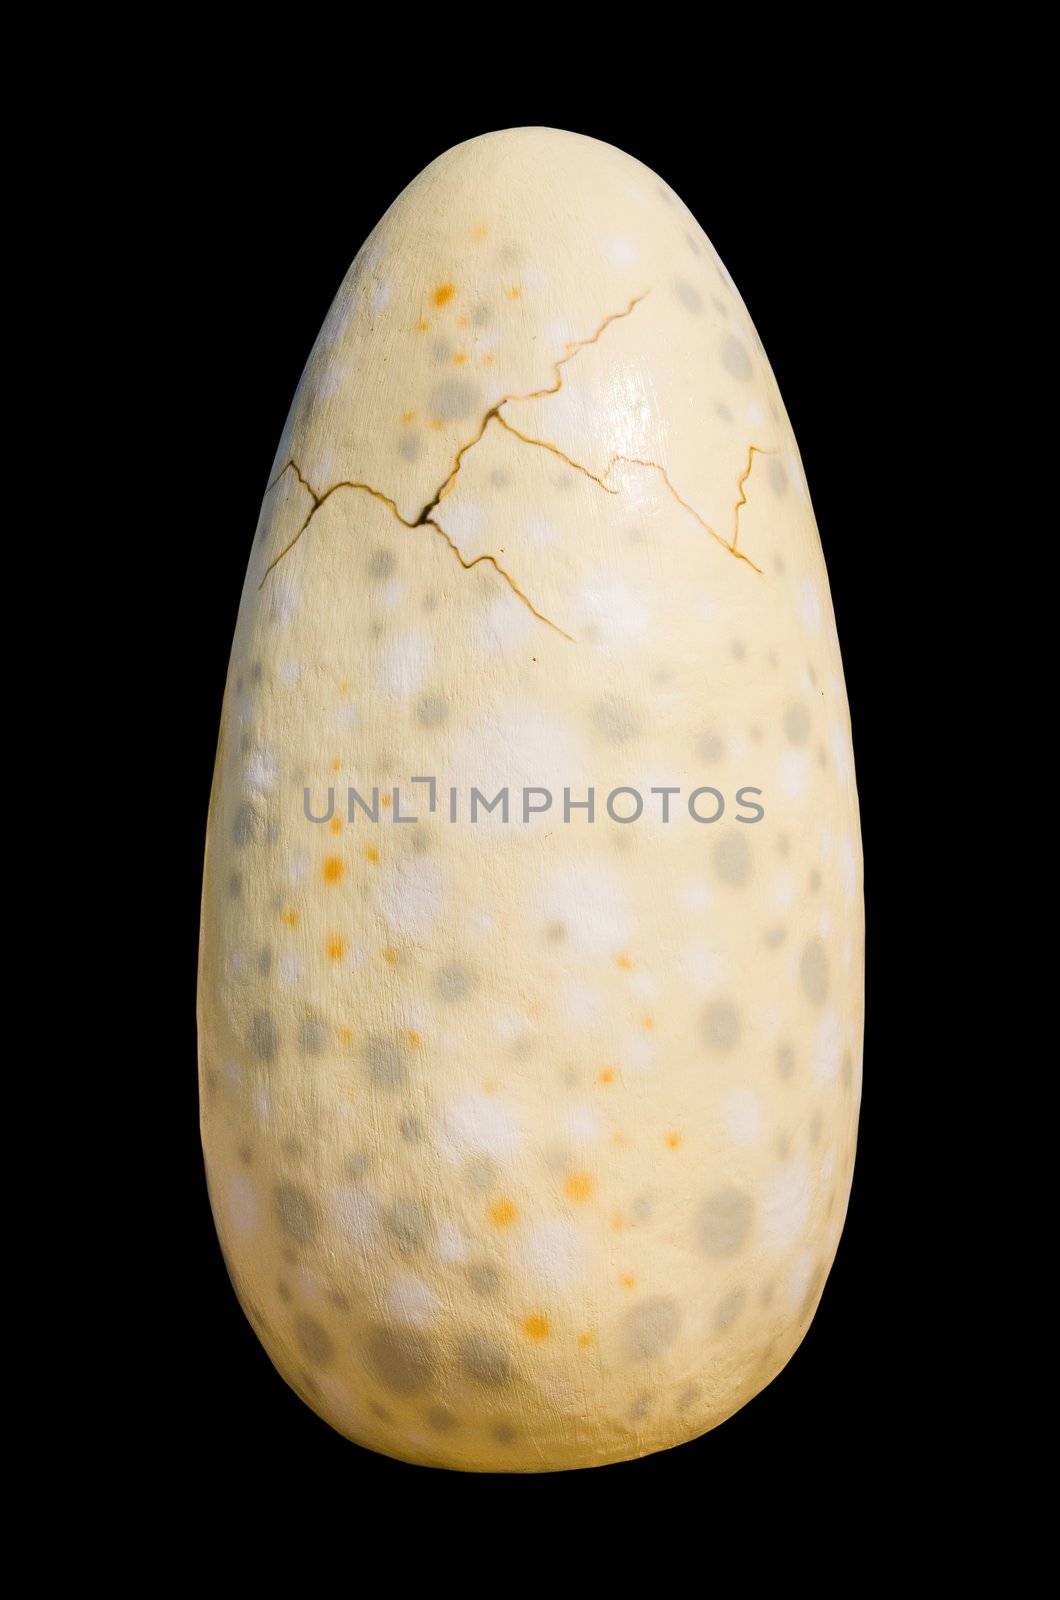 Jurassic park - set of dinosaurs - dinosaur egg isolated on black background with clipping paths